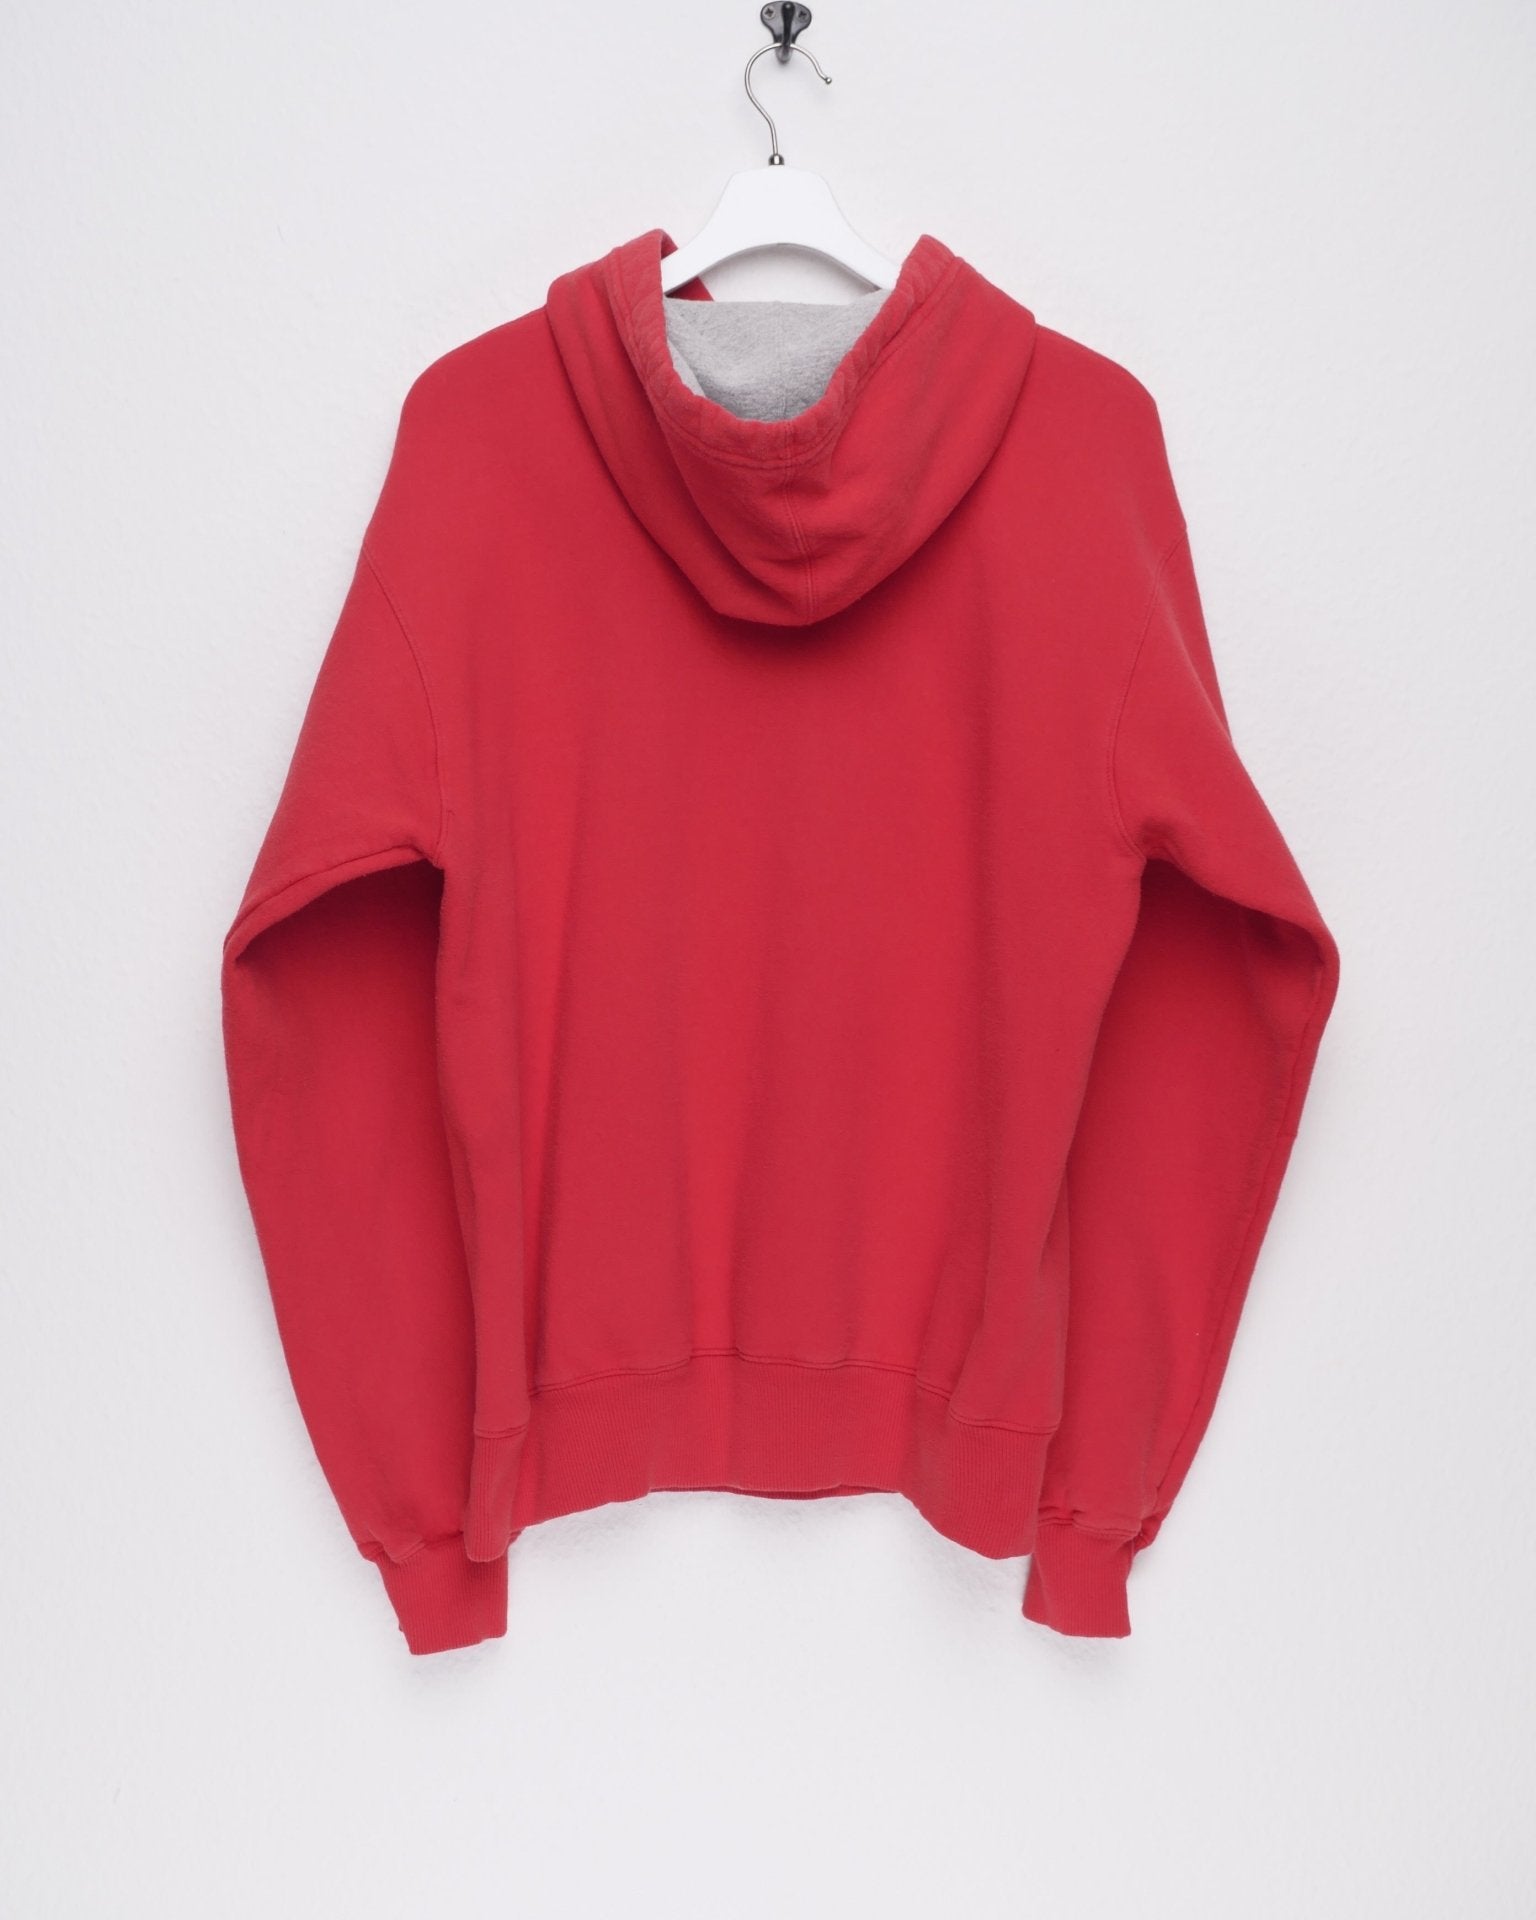 Champion embroidered Logo basic red Hoodie - Peeces